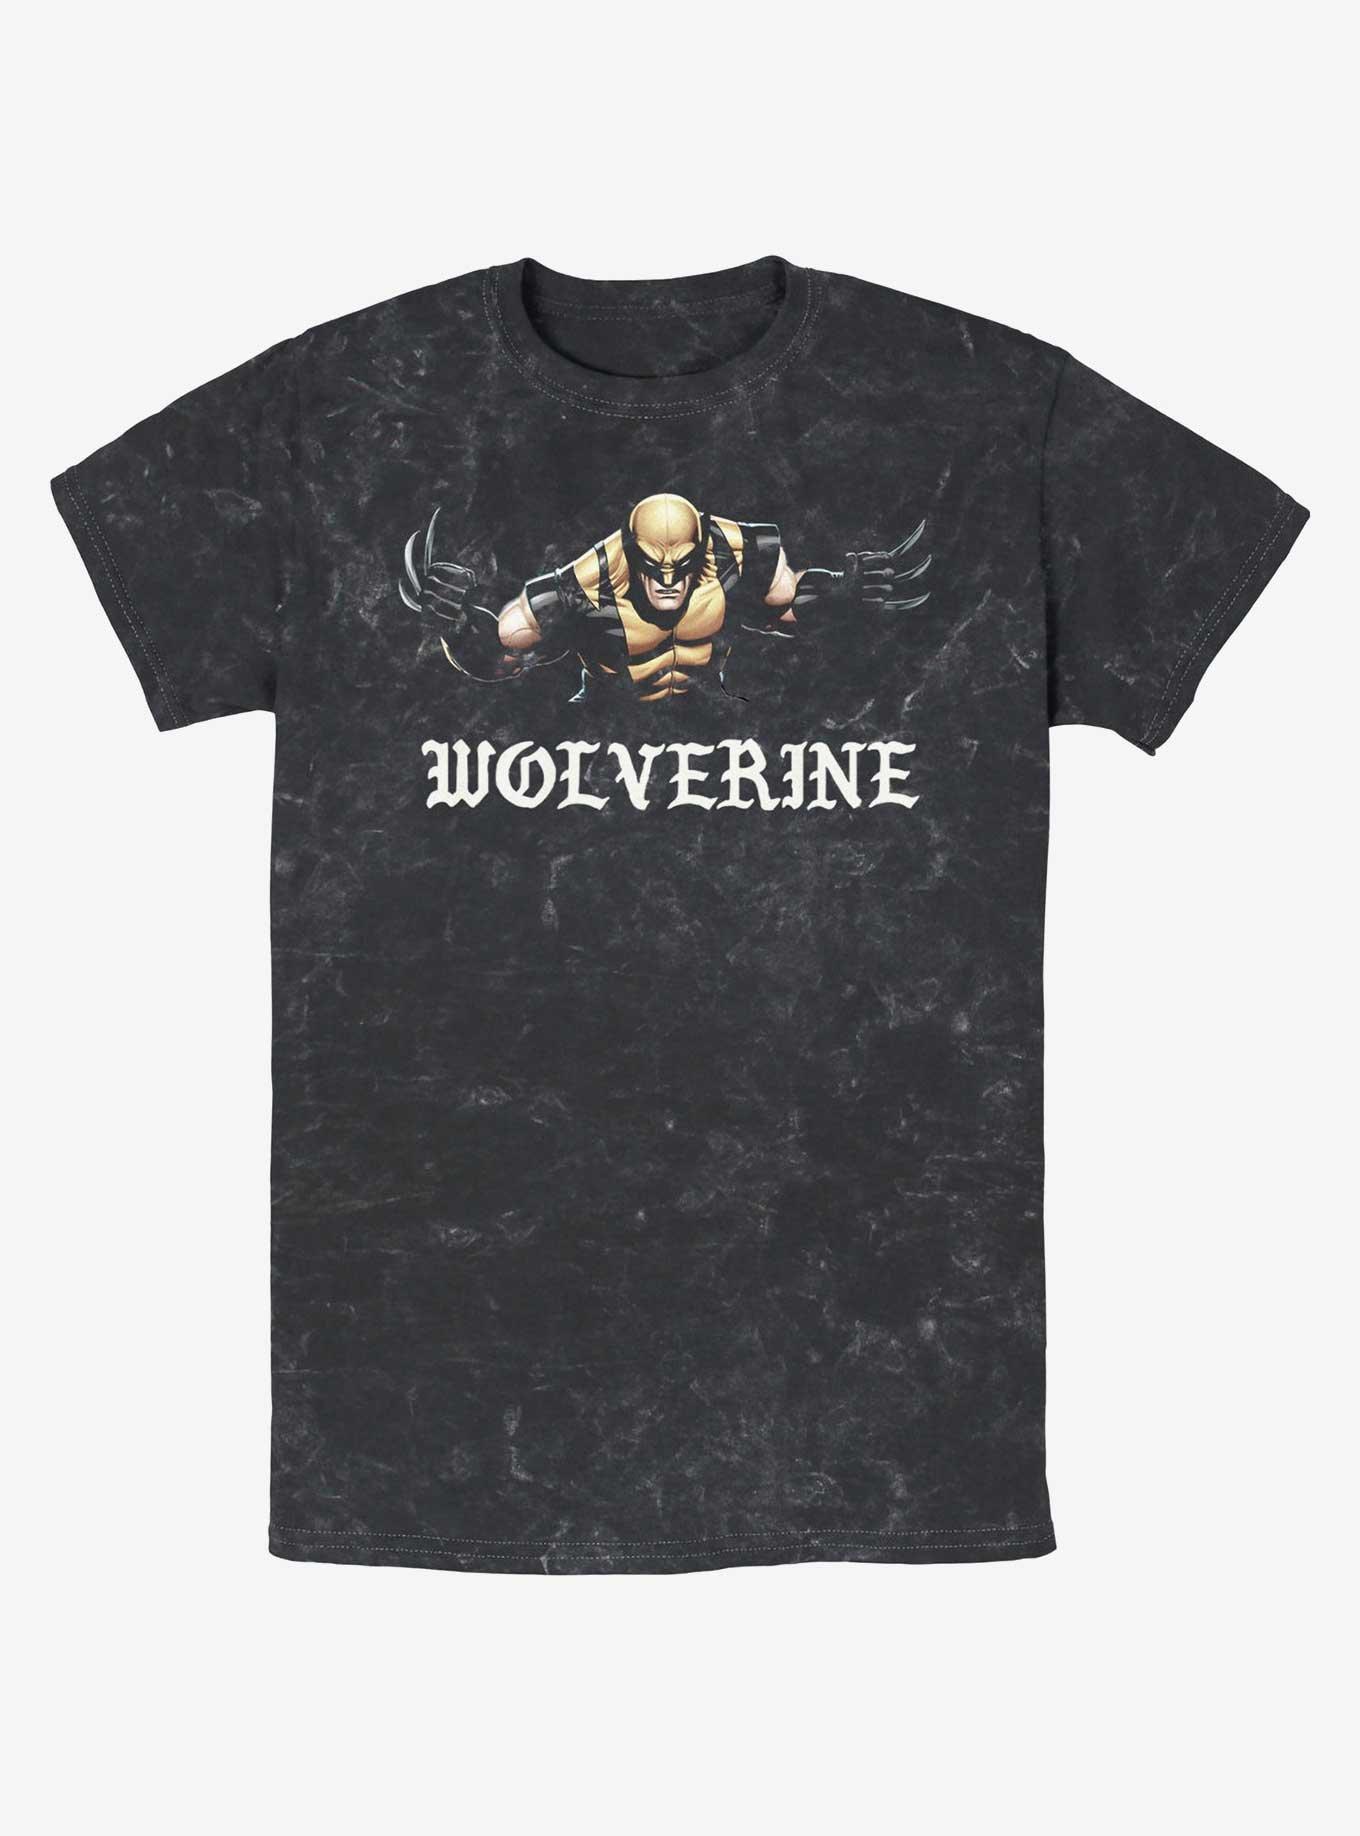 Wolverine Punch With Blades Mineral Wash T-Shirt, BLACK, hi-res